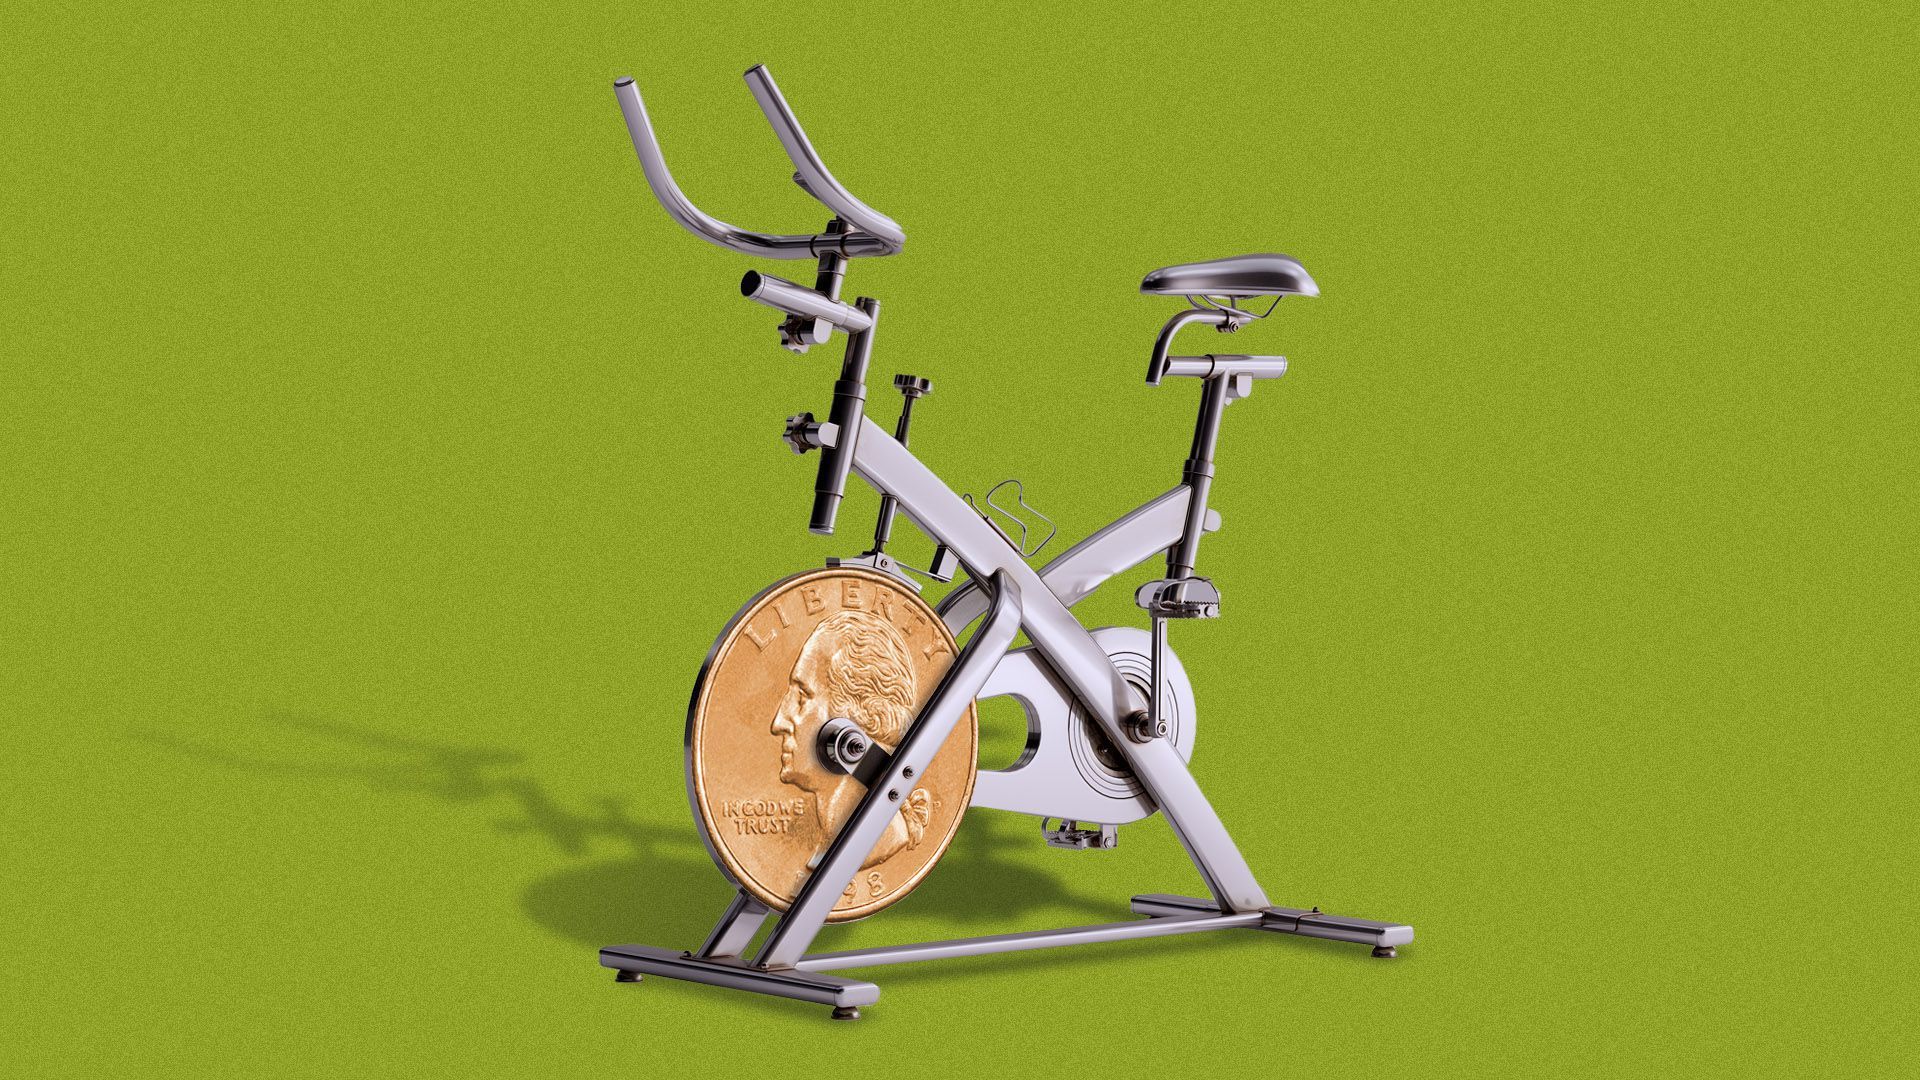 Illustration of an exercise bike with a quarter for a wheel